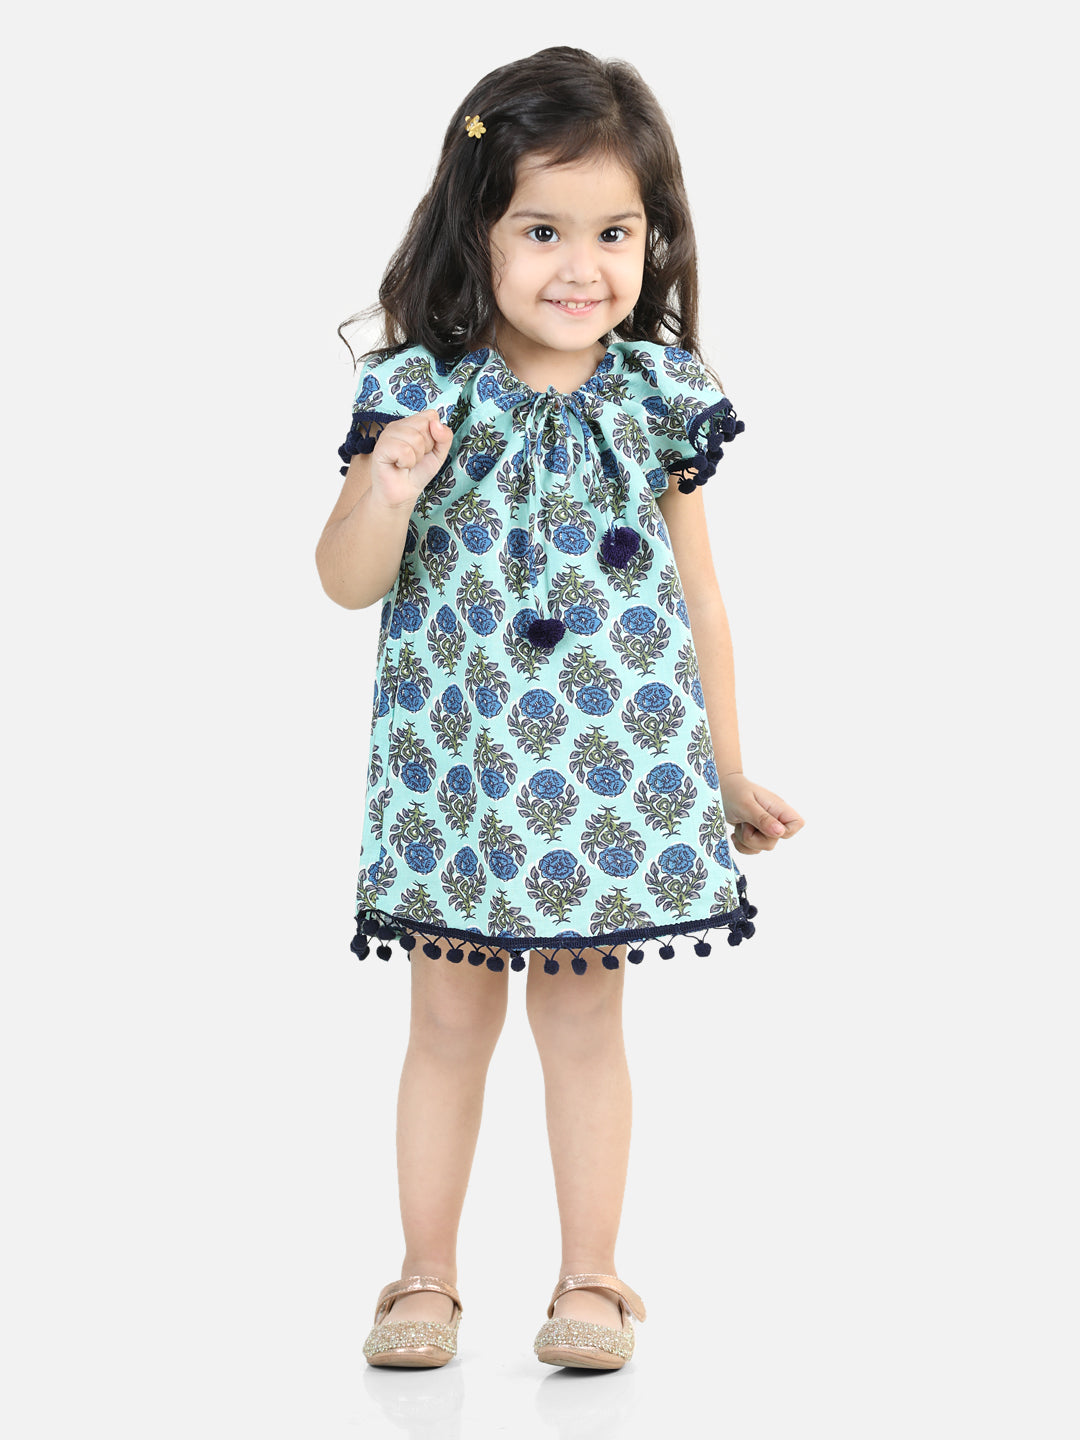 BownBee 100% Cotton Printed with Pompom Jhabla Frock for Girls - Light Blue